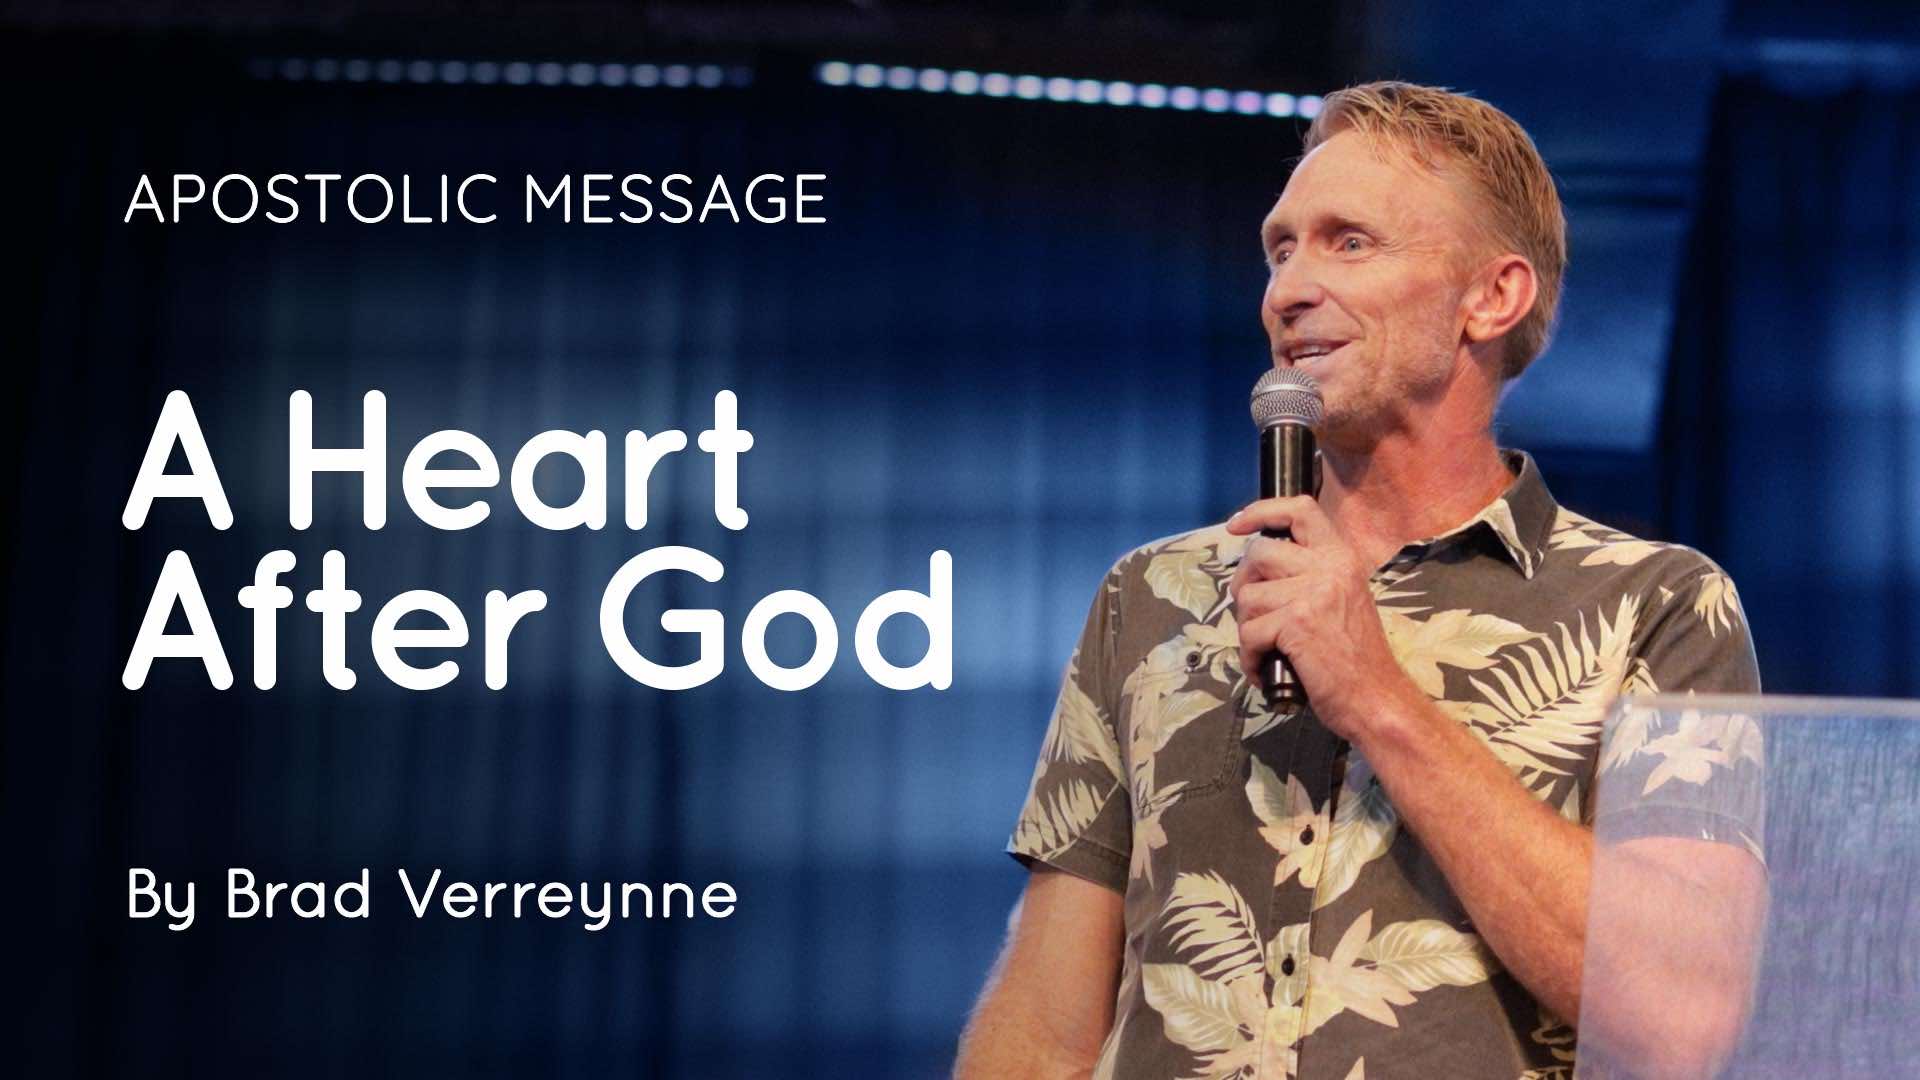 Featured image for "A heart after god|" apostolic message by brad verreynne